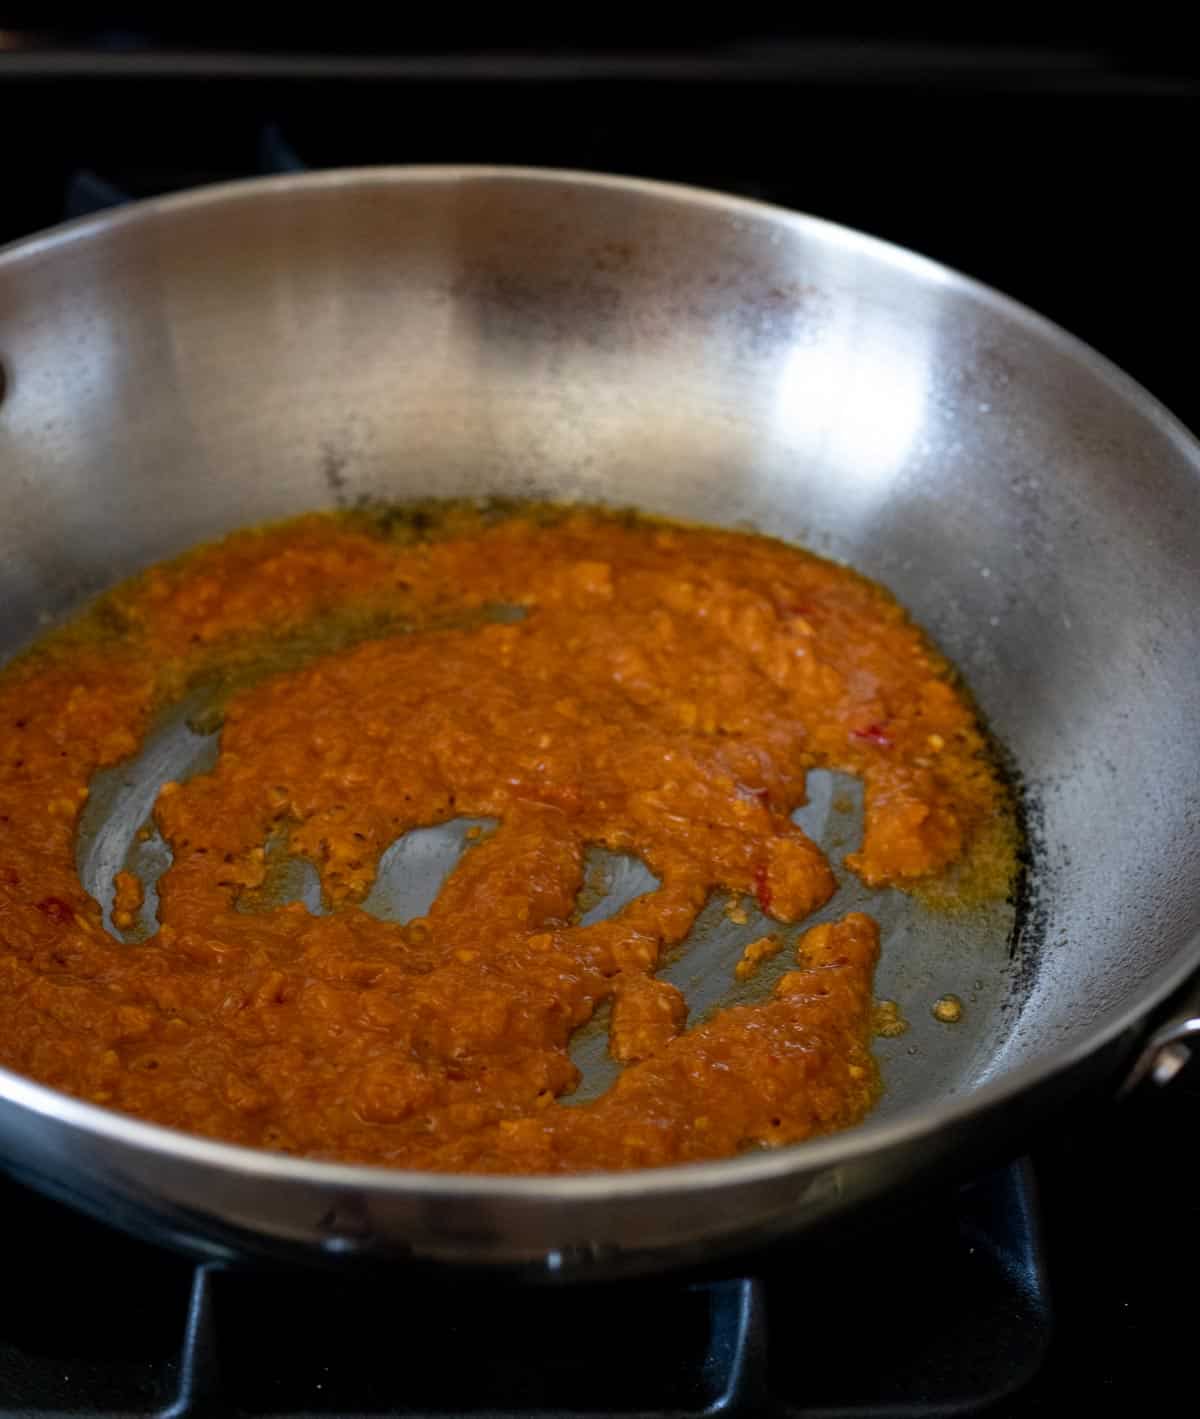 Spice paste cooking in a high-sided skillet.